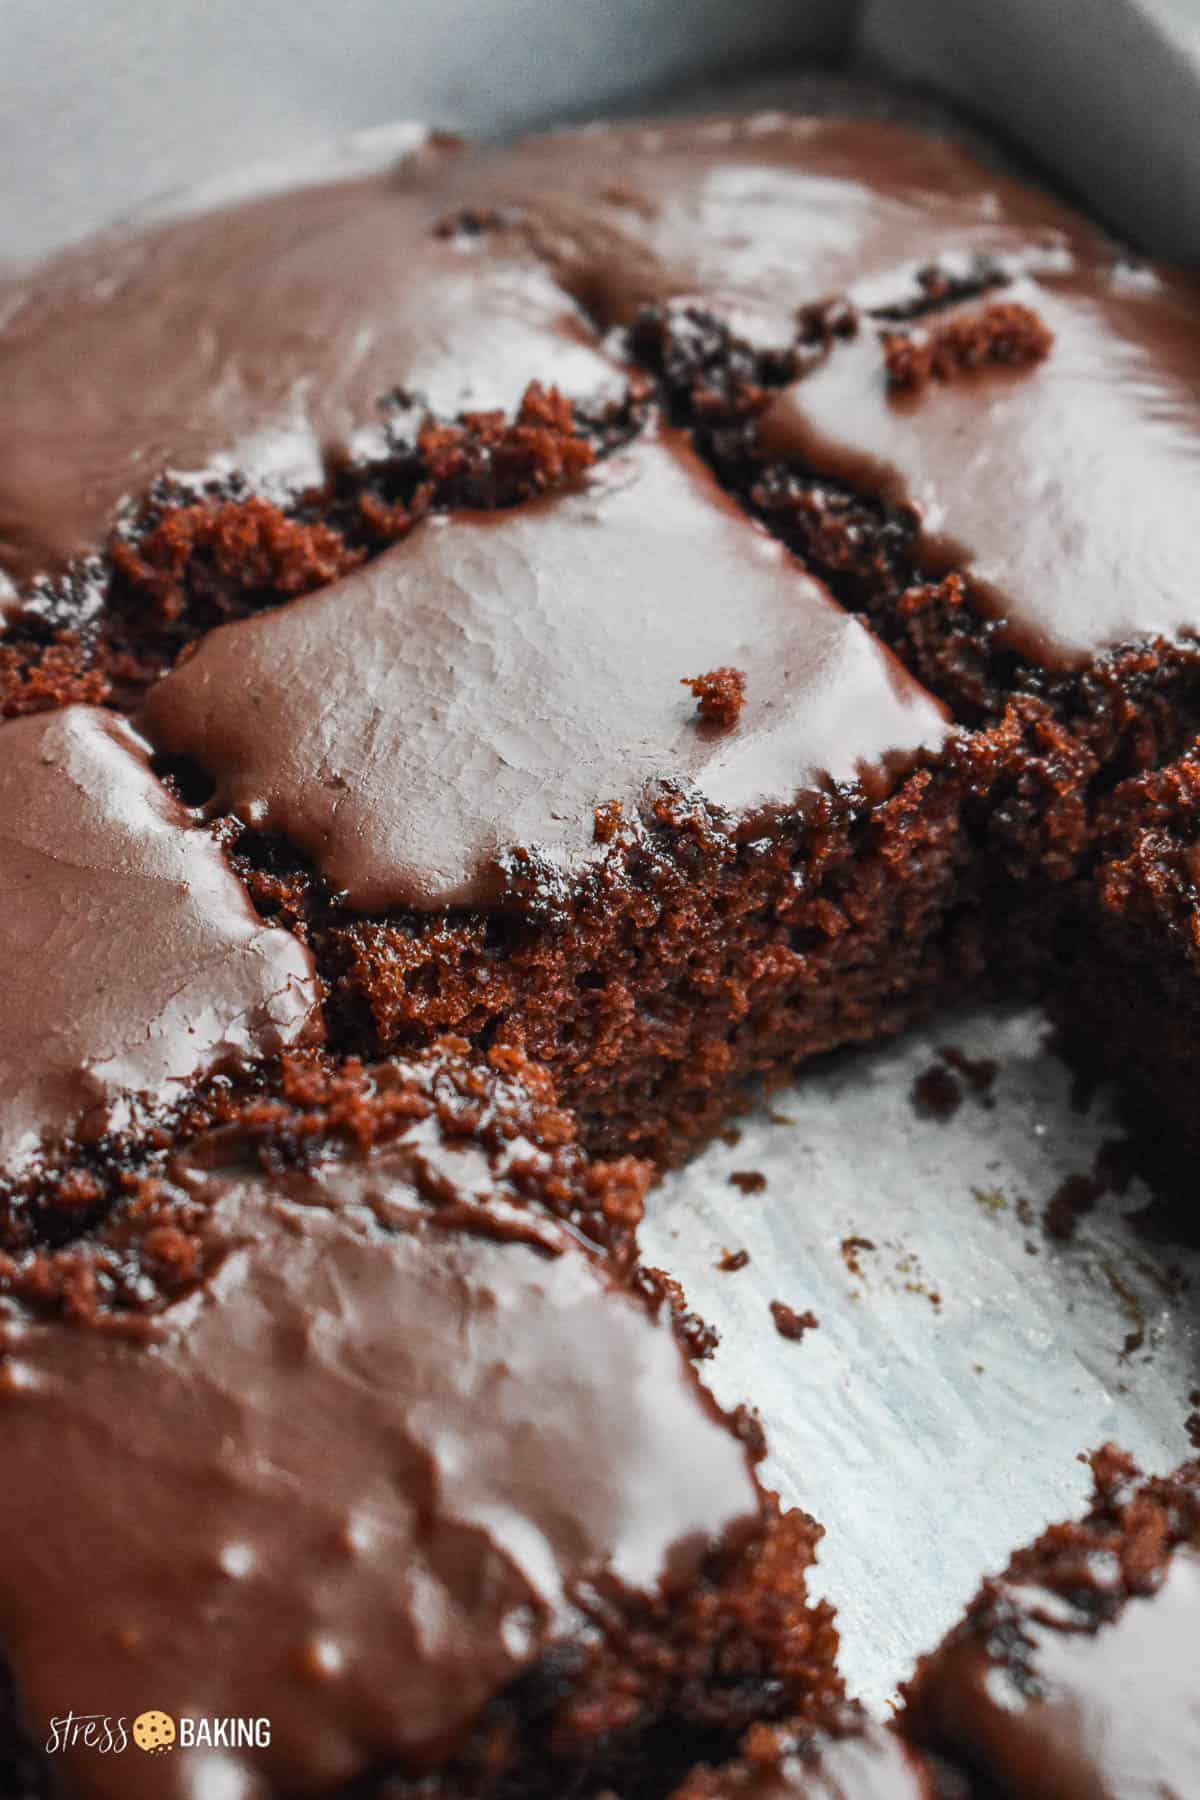 A close up of chocolate sheet cake with chocolate icing